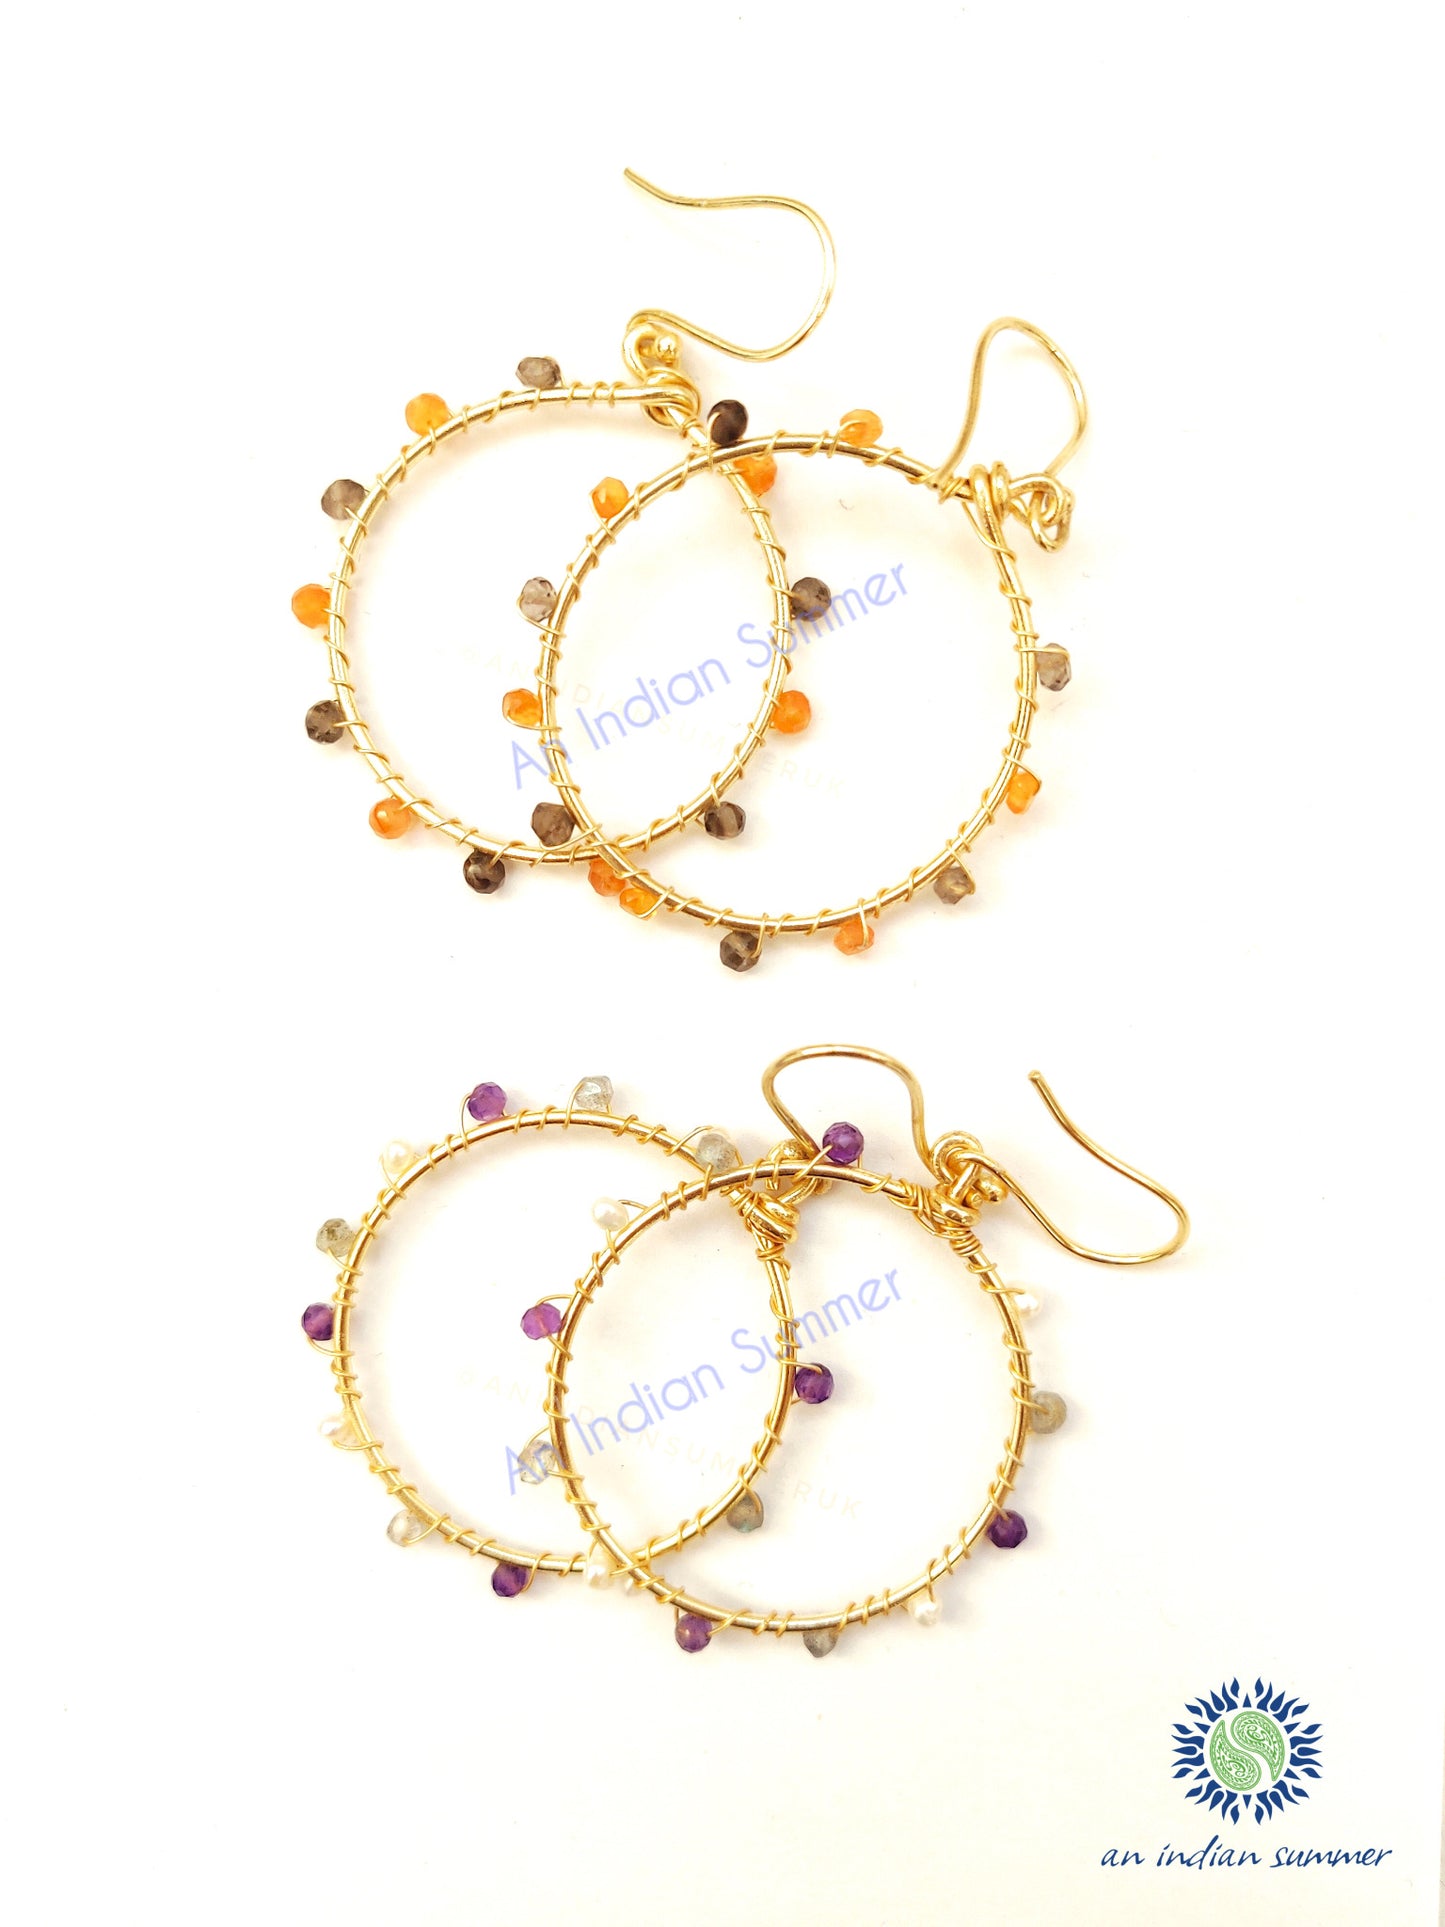  Gem Hoops Earrings | Carnelian Labradorite Amethyst Fresh Water Pearls | 24 Carat Gold Plated | Semi Precious Jewellery | An Indian Summer | Seasonless Timeless Sustainable Ethical Authentic Artisan Conscious Clothing Lifestyle Brand